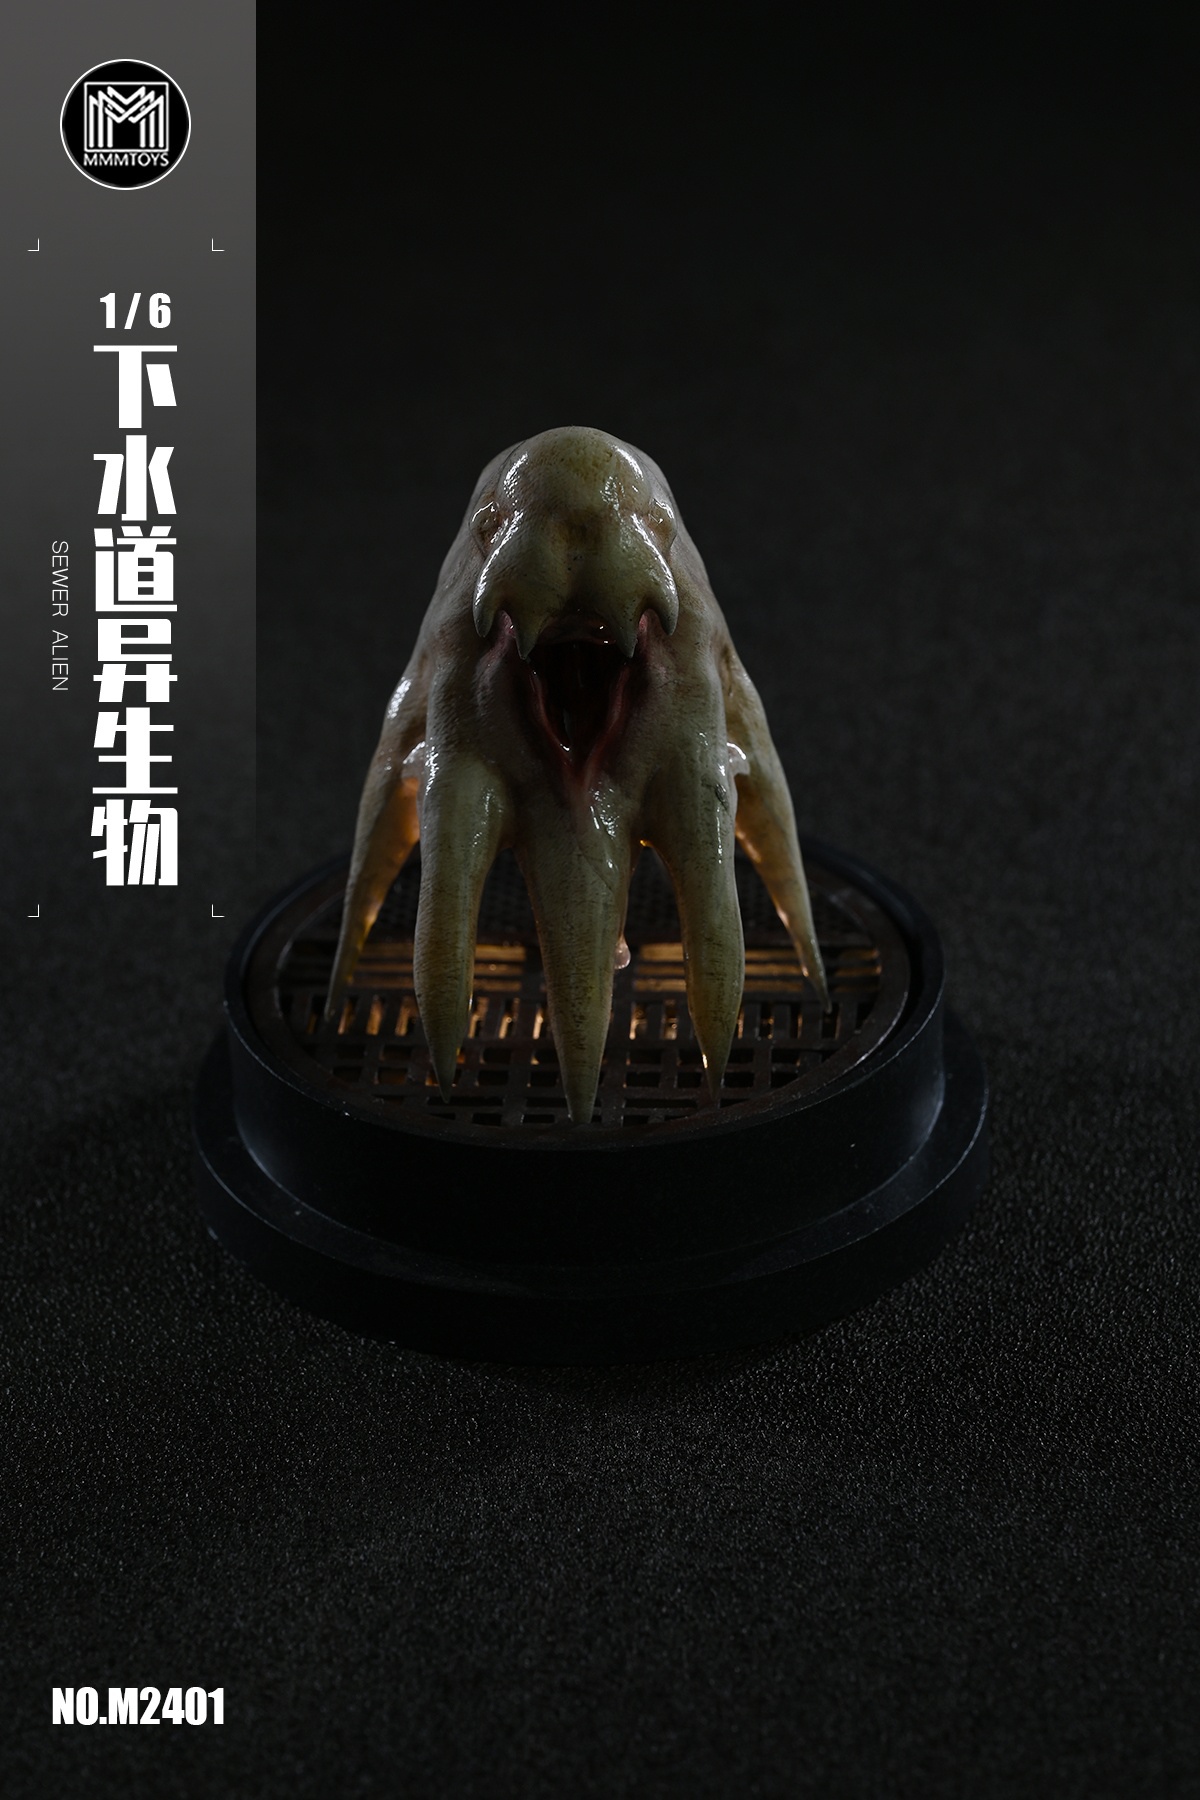 monster - NEW PRODUCT: MMMTOYS - Sewer Alien (M2401) 09165